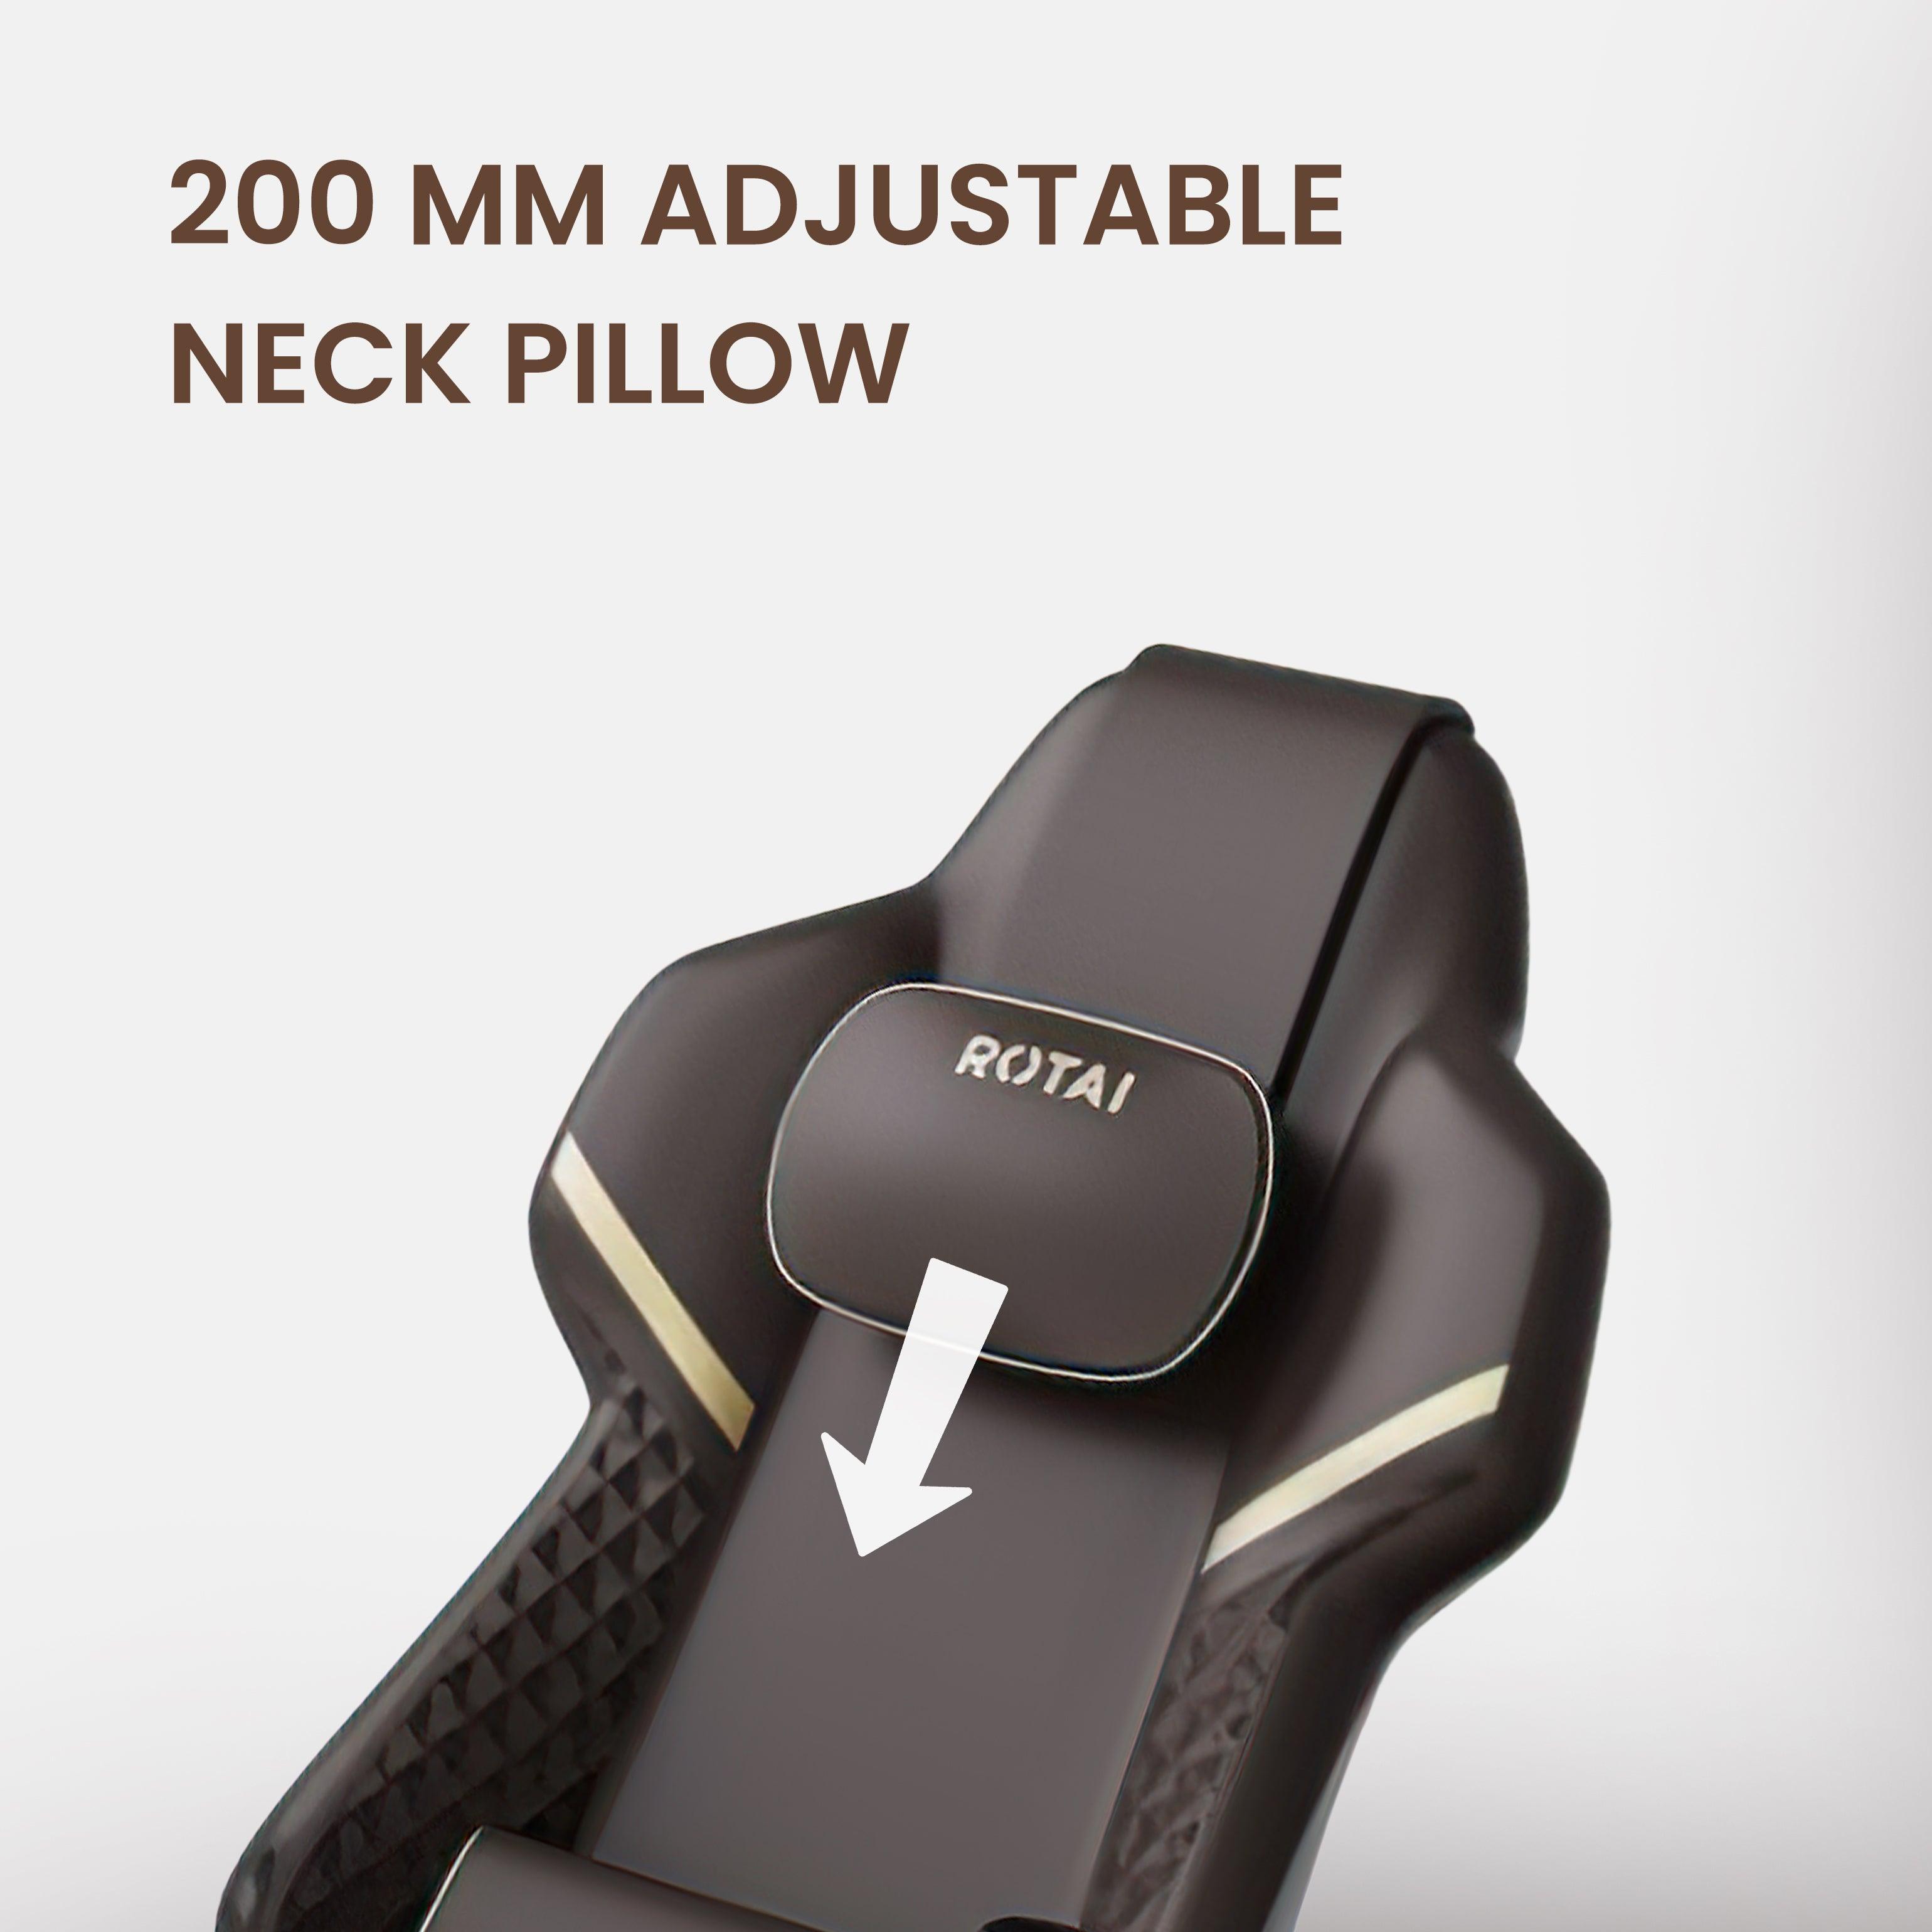 Brown office massage chair with 200 mm adjustable neck pillow, featuring button-type smart App control and straight rail for massage.